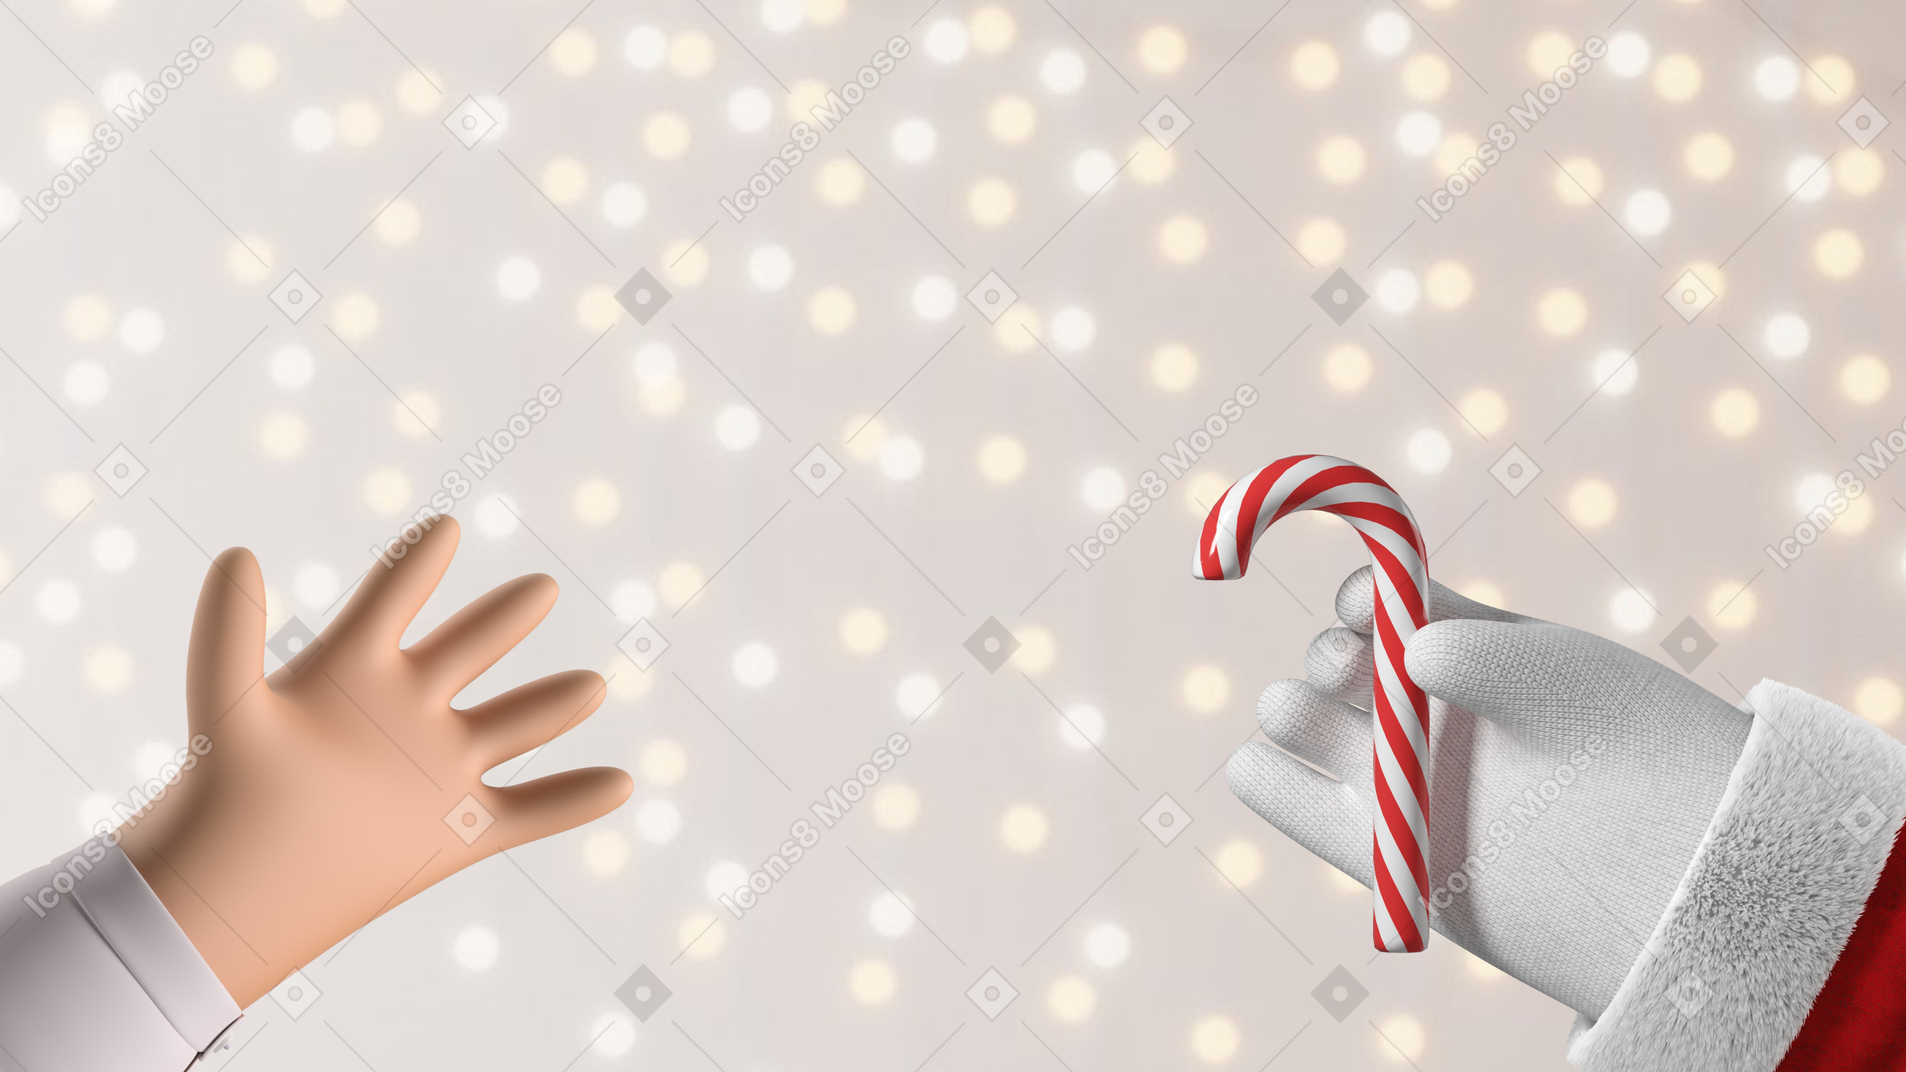 Santa passing a candy cane to a person